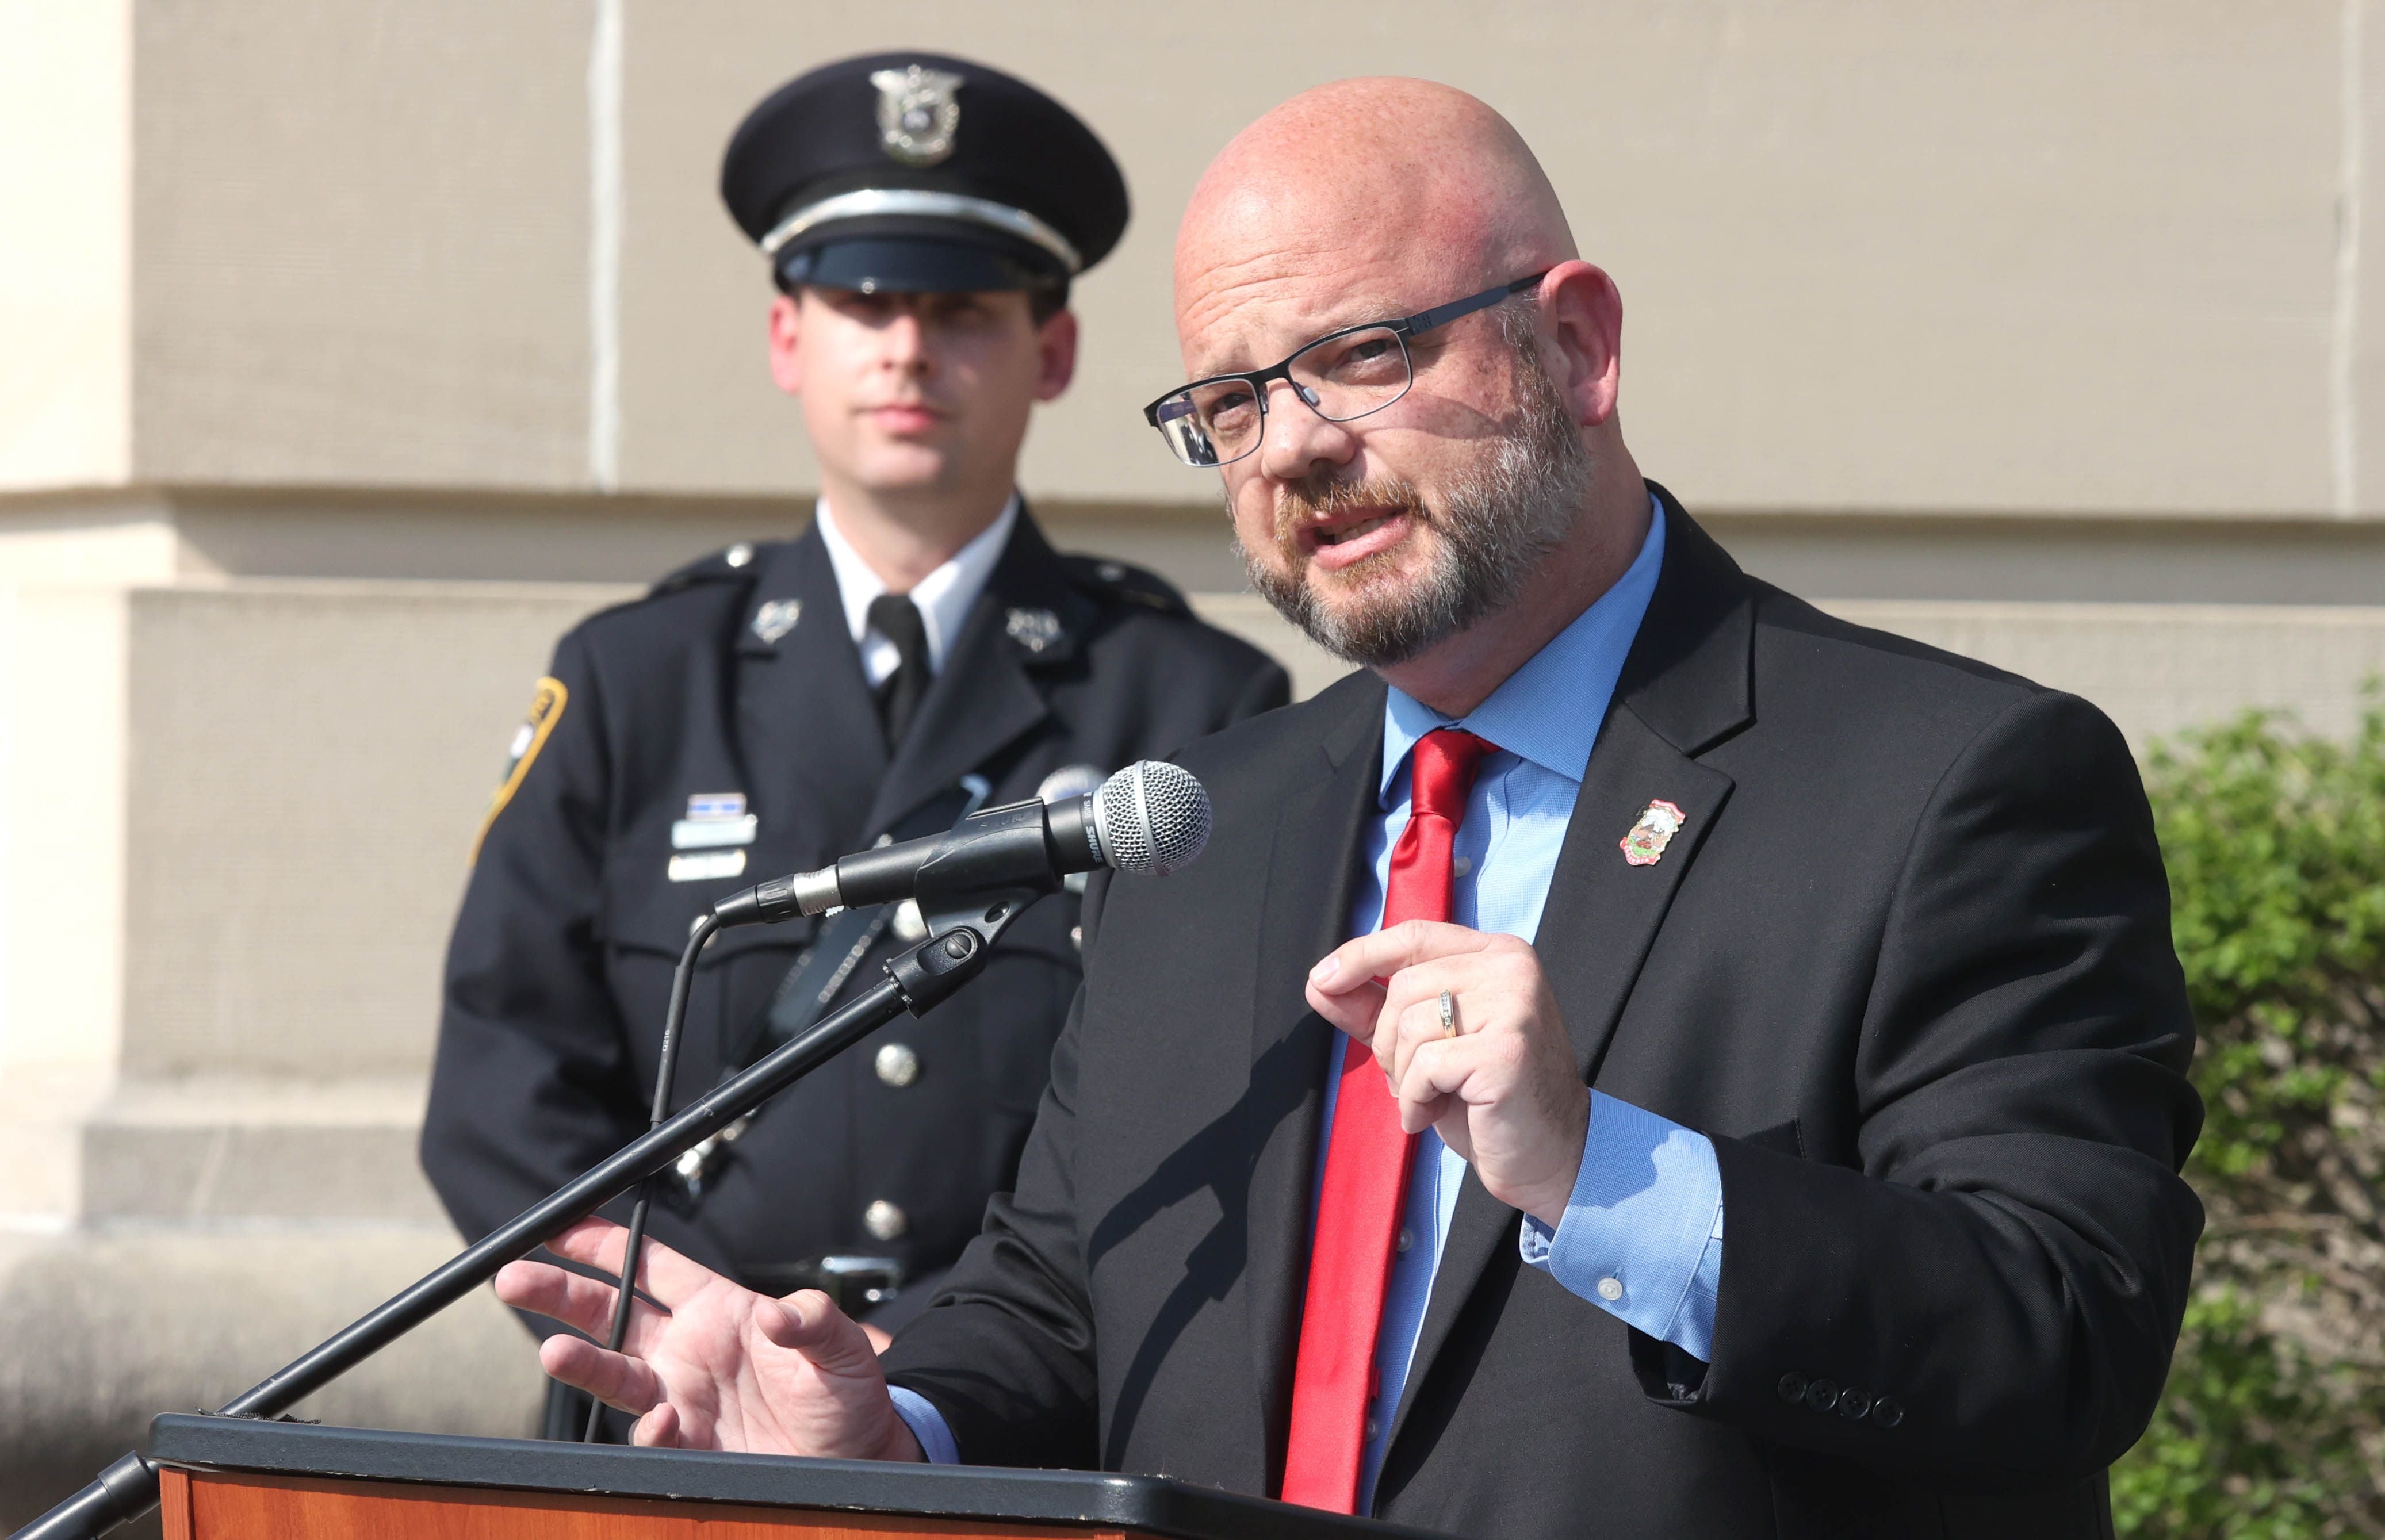 State Rep. Jeff Keicher, R-Sycamore, speaks as Sycamore Police Department detective Ryan Hooper looks on Friday, May 13, 2022, during the DeKalb County Law Enforcement Officers' Memorial Service on the lawn of the DeKalb County Courthouse in Sycamore.